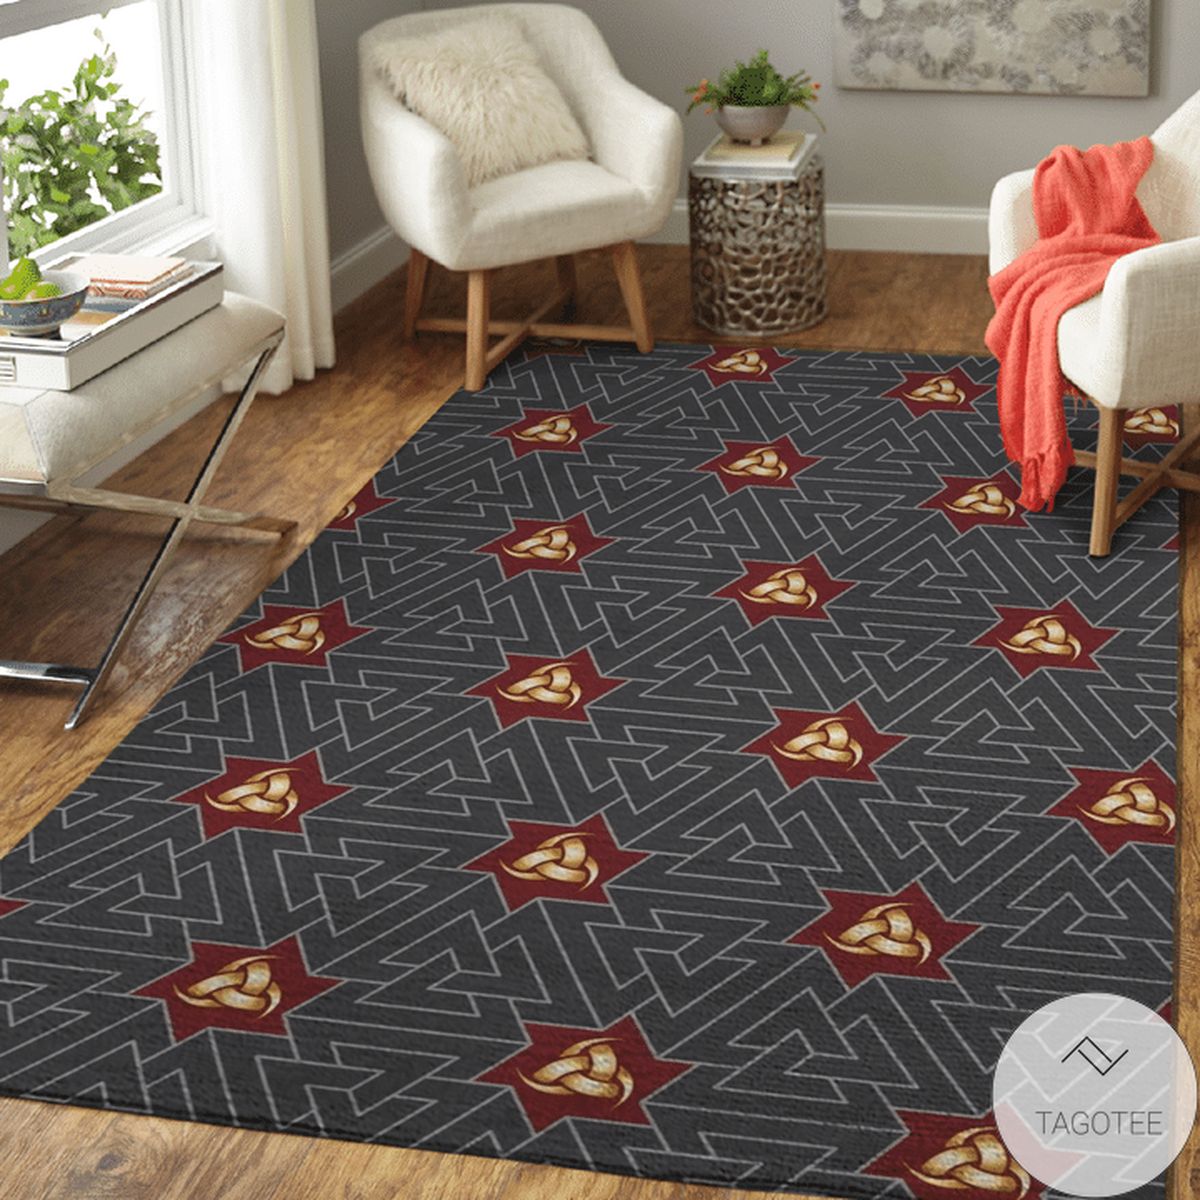 Horns Of Odin And Valknut Viking Area Rug